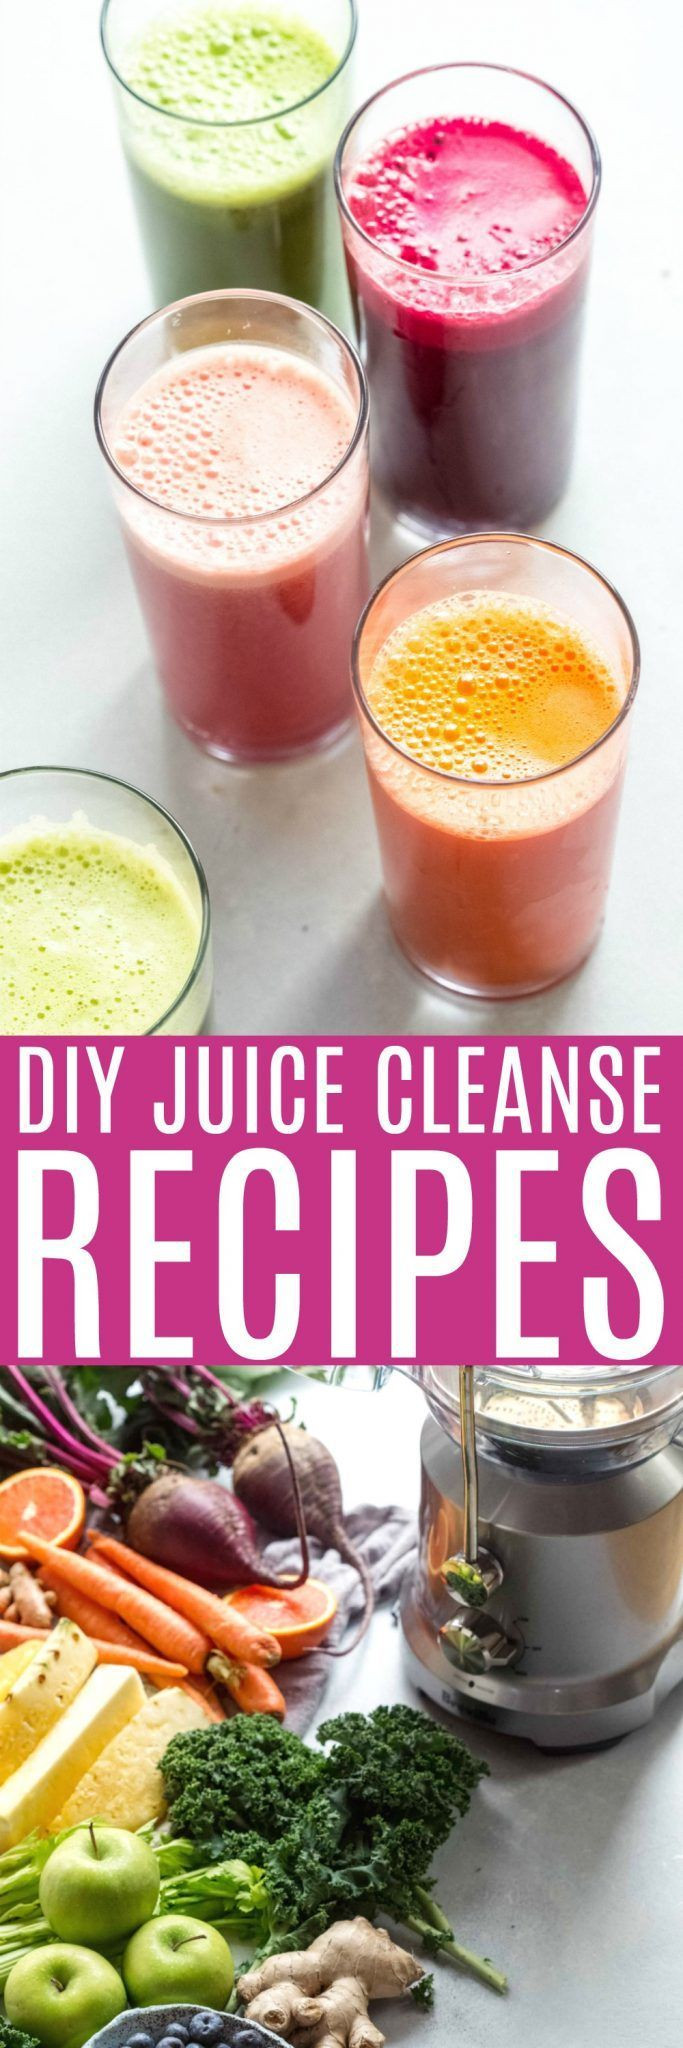 22 Of the Best Ideas for Juice Recipes for Weight Loss and Energy